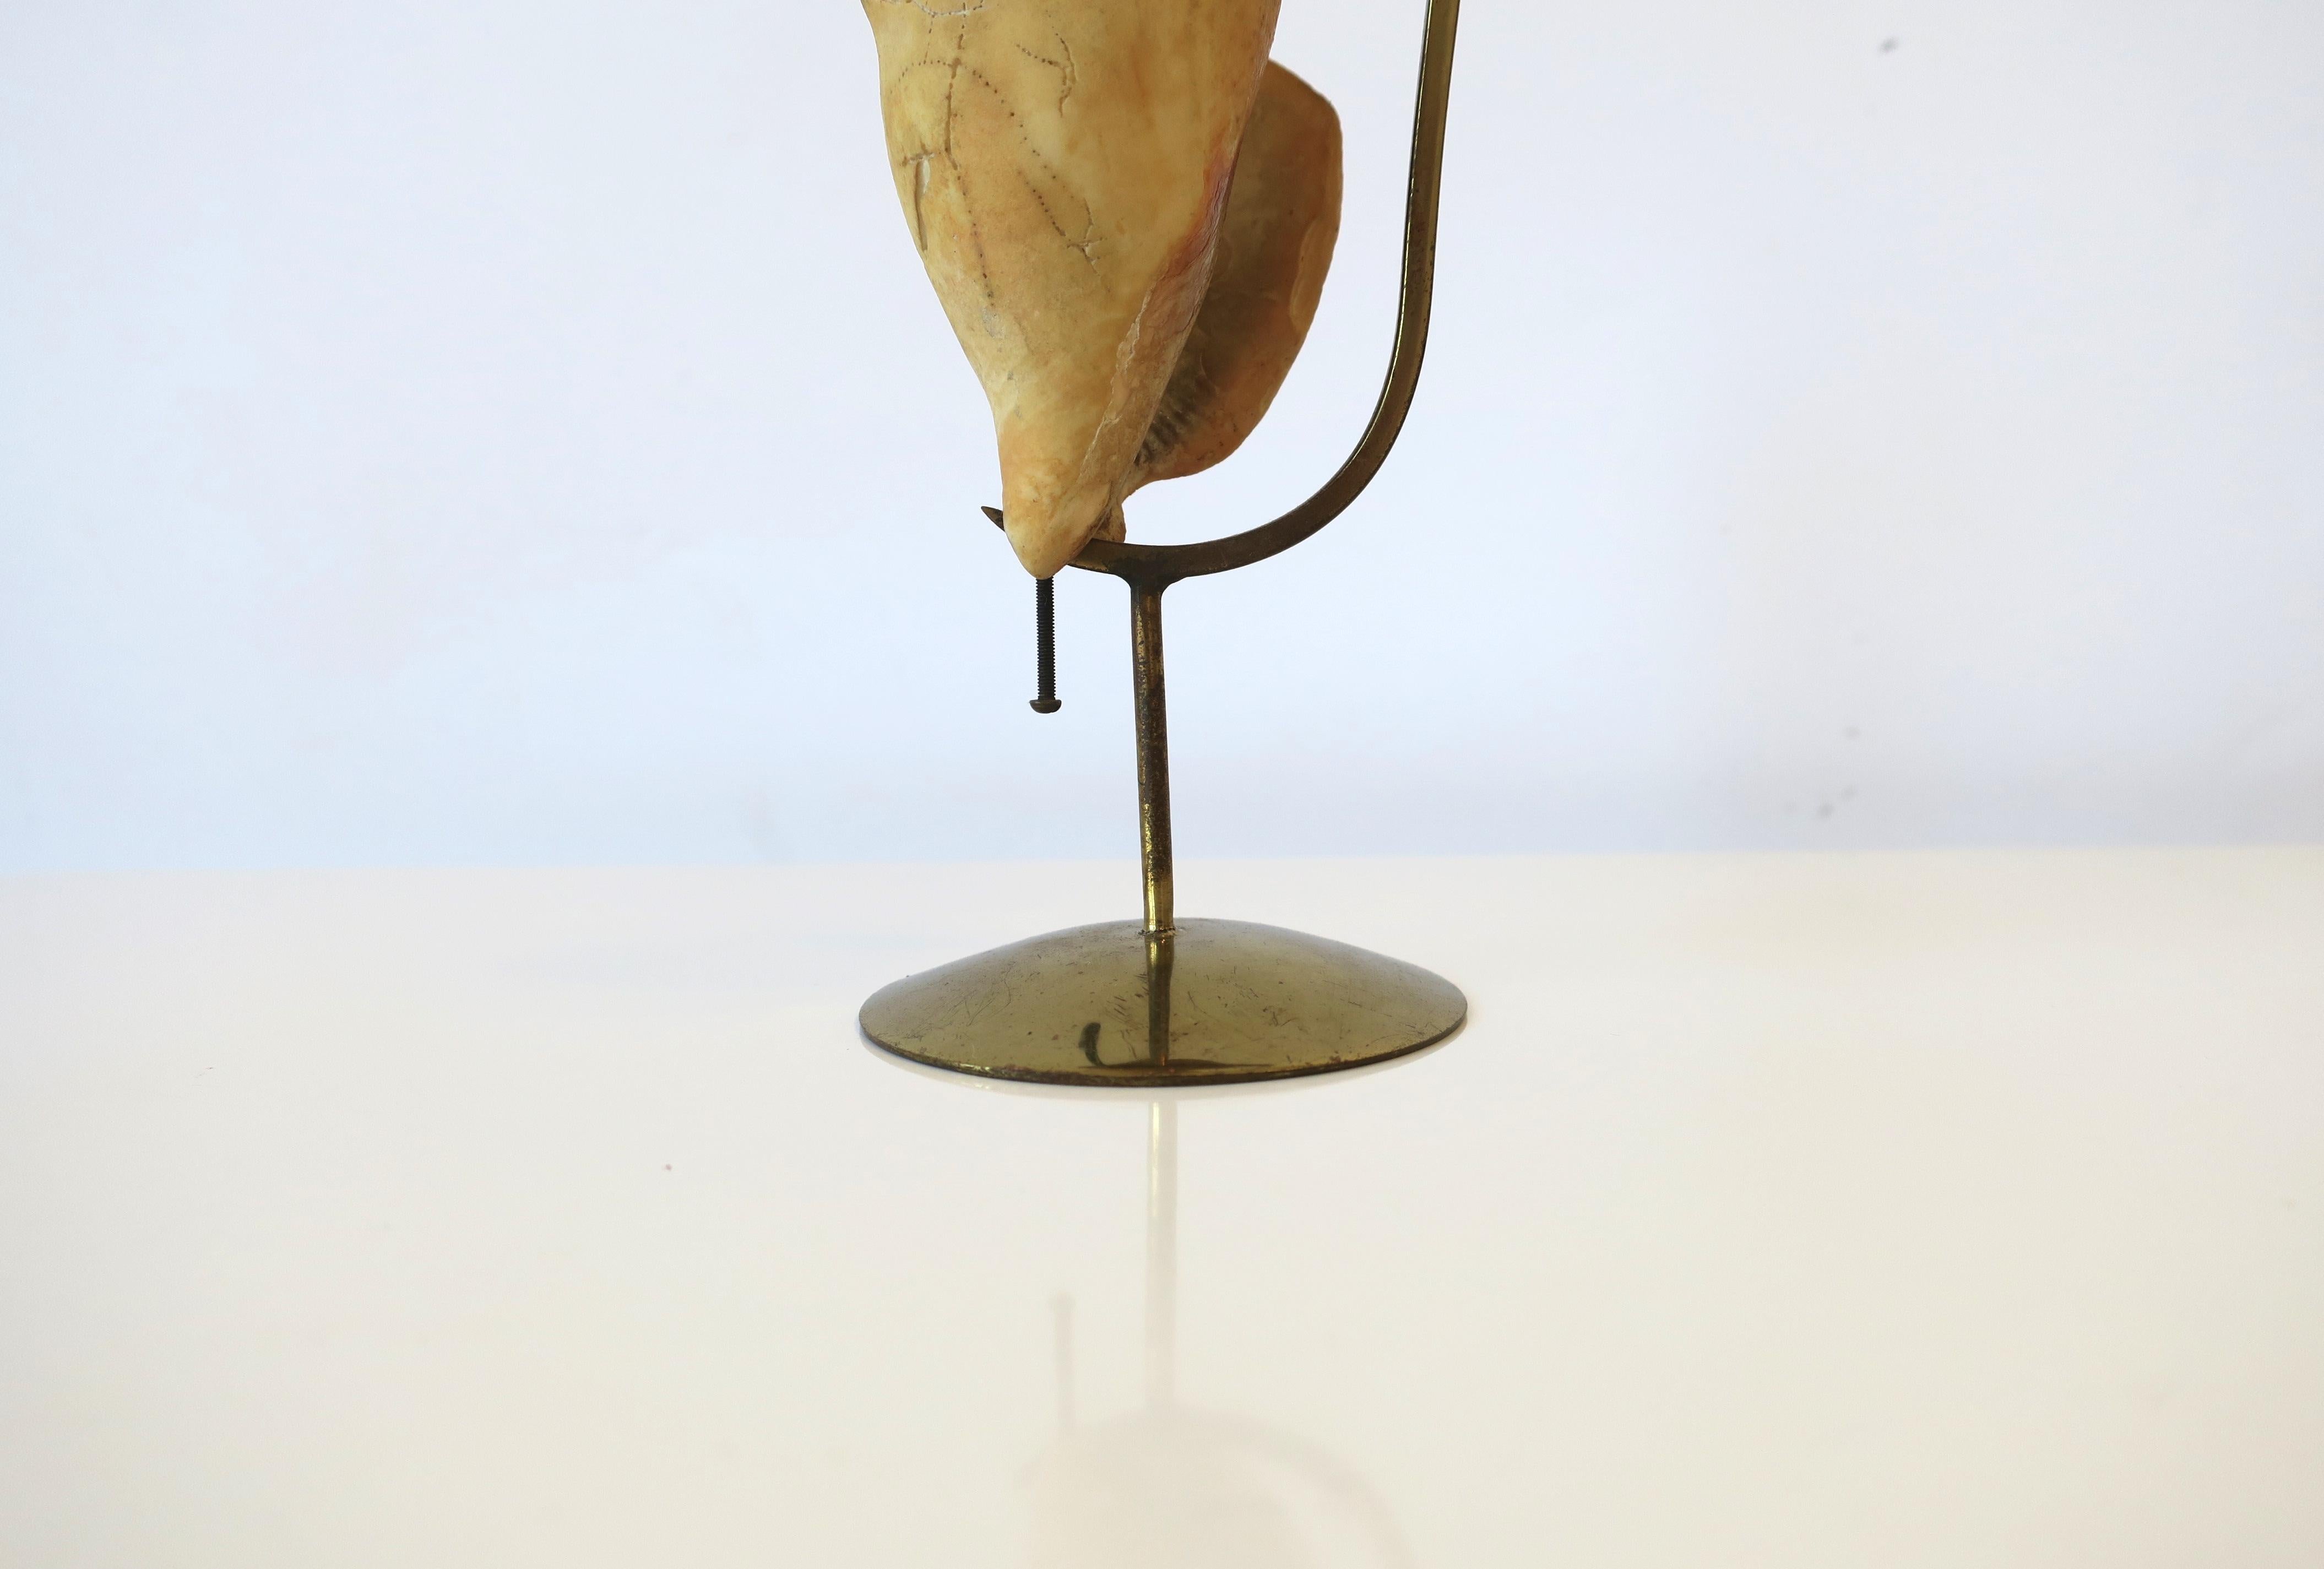 Marguerite Stix Designed Natural Seashell and Brass Object, circa 1960s For Sale 5